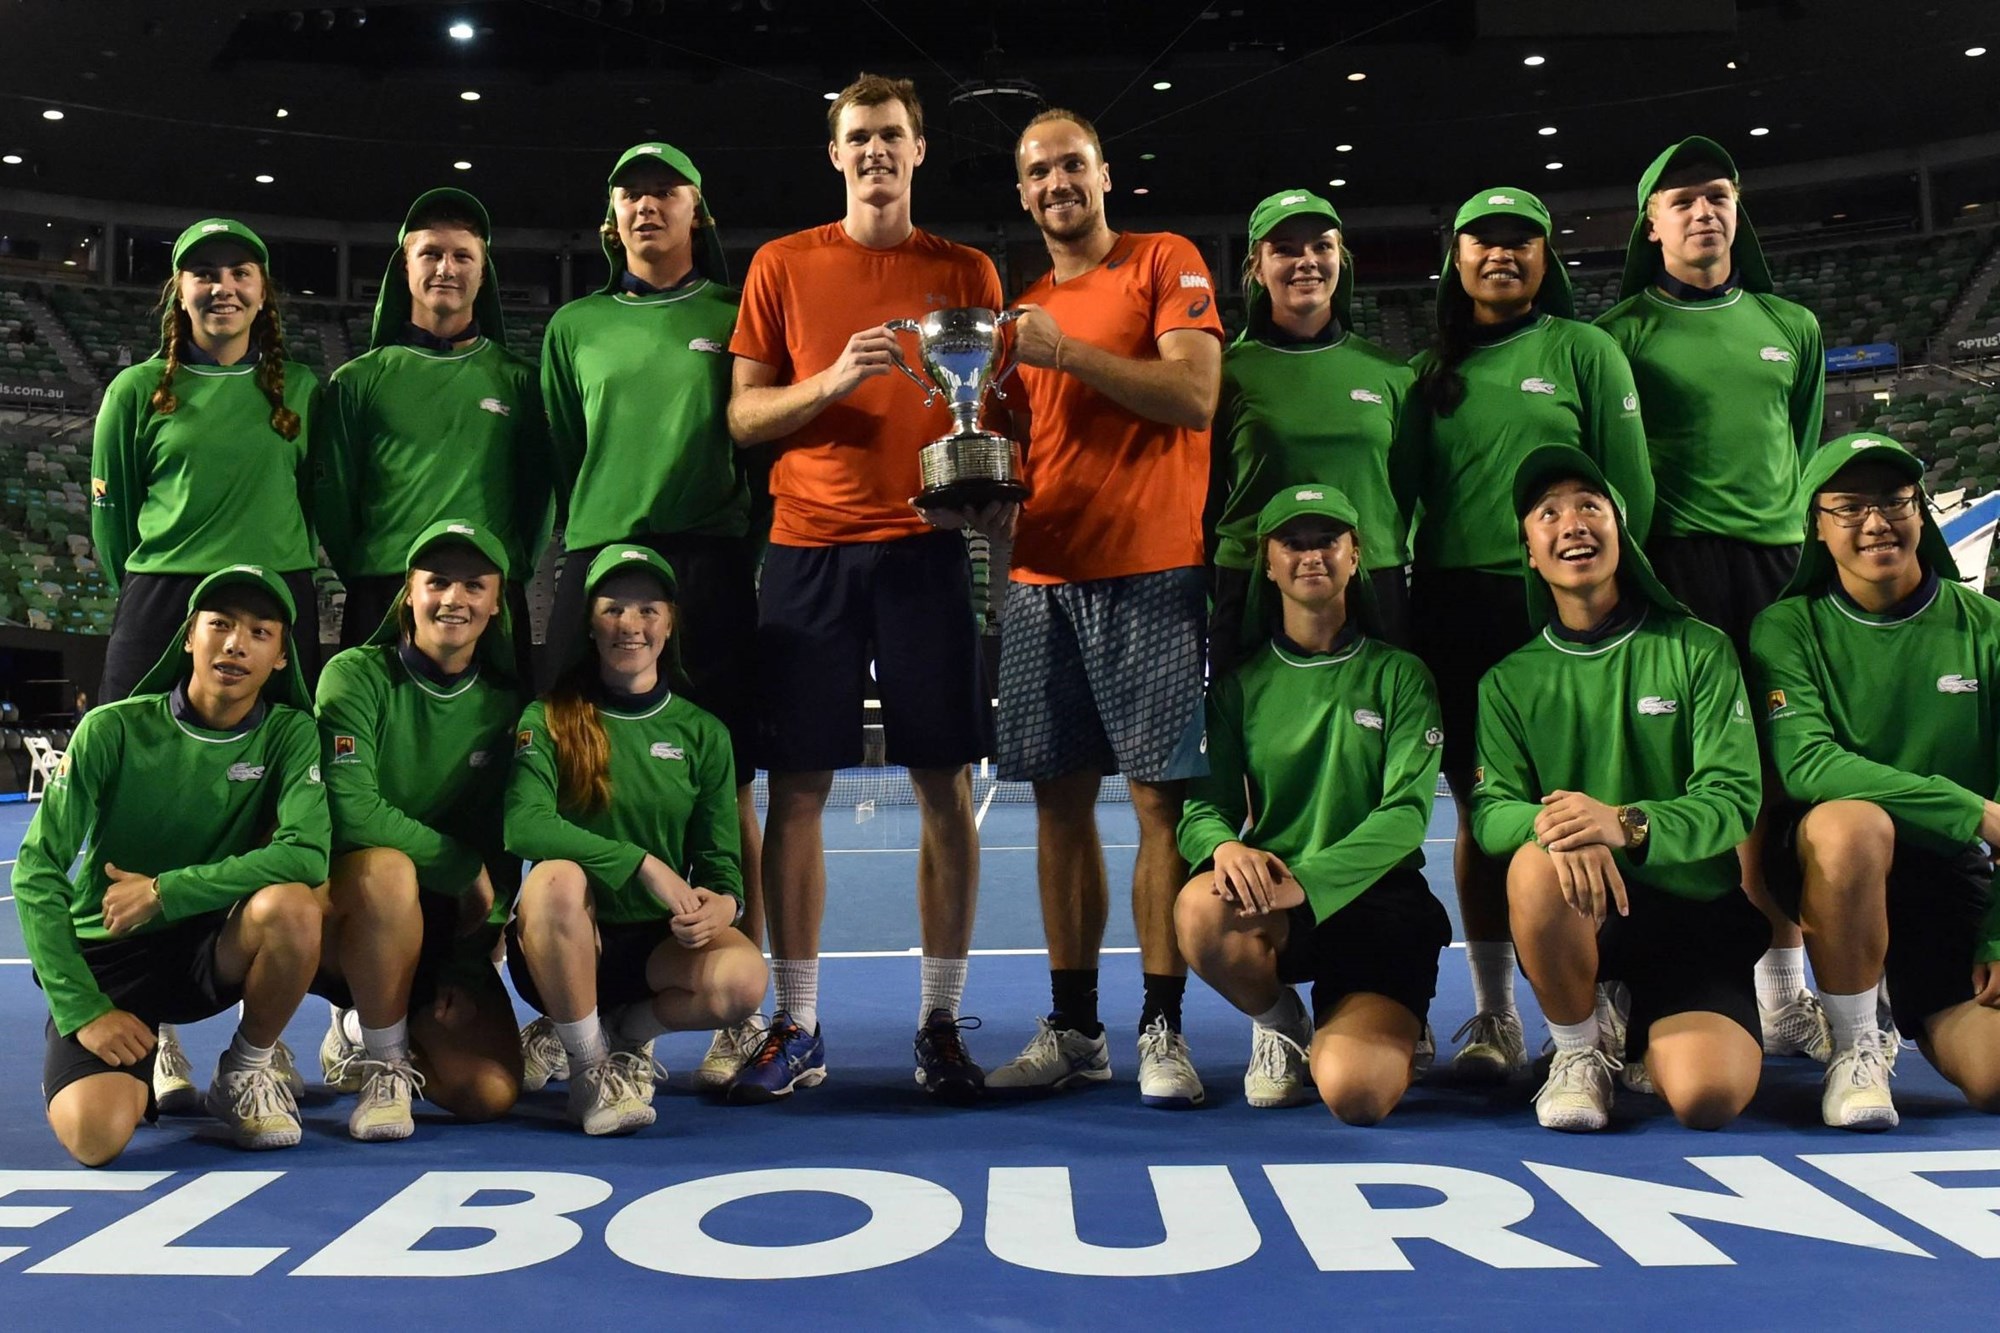 Jamie Murray and Bruno Soares holding the 2016 Australian Open title with the ball kids